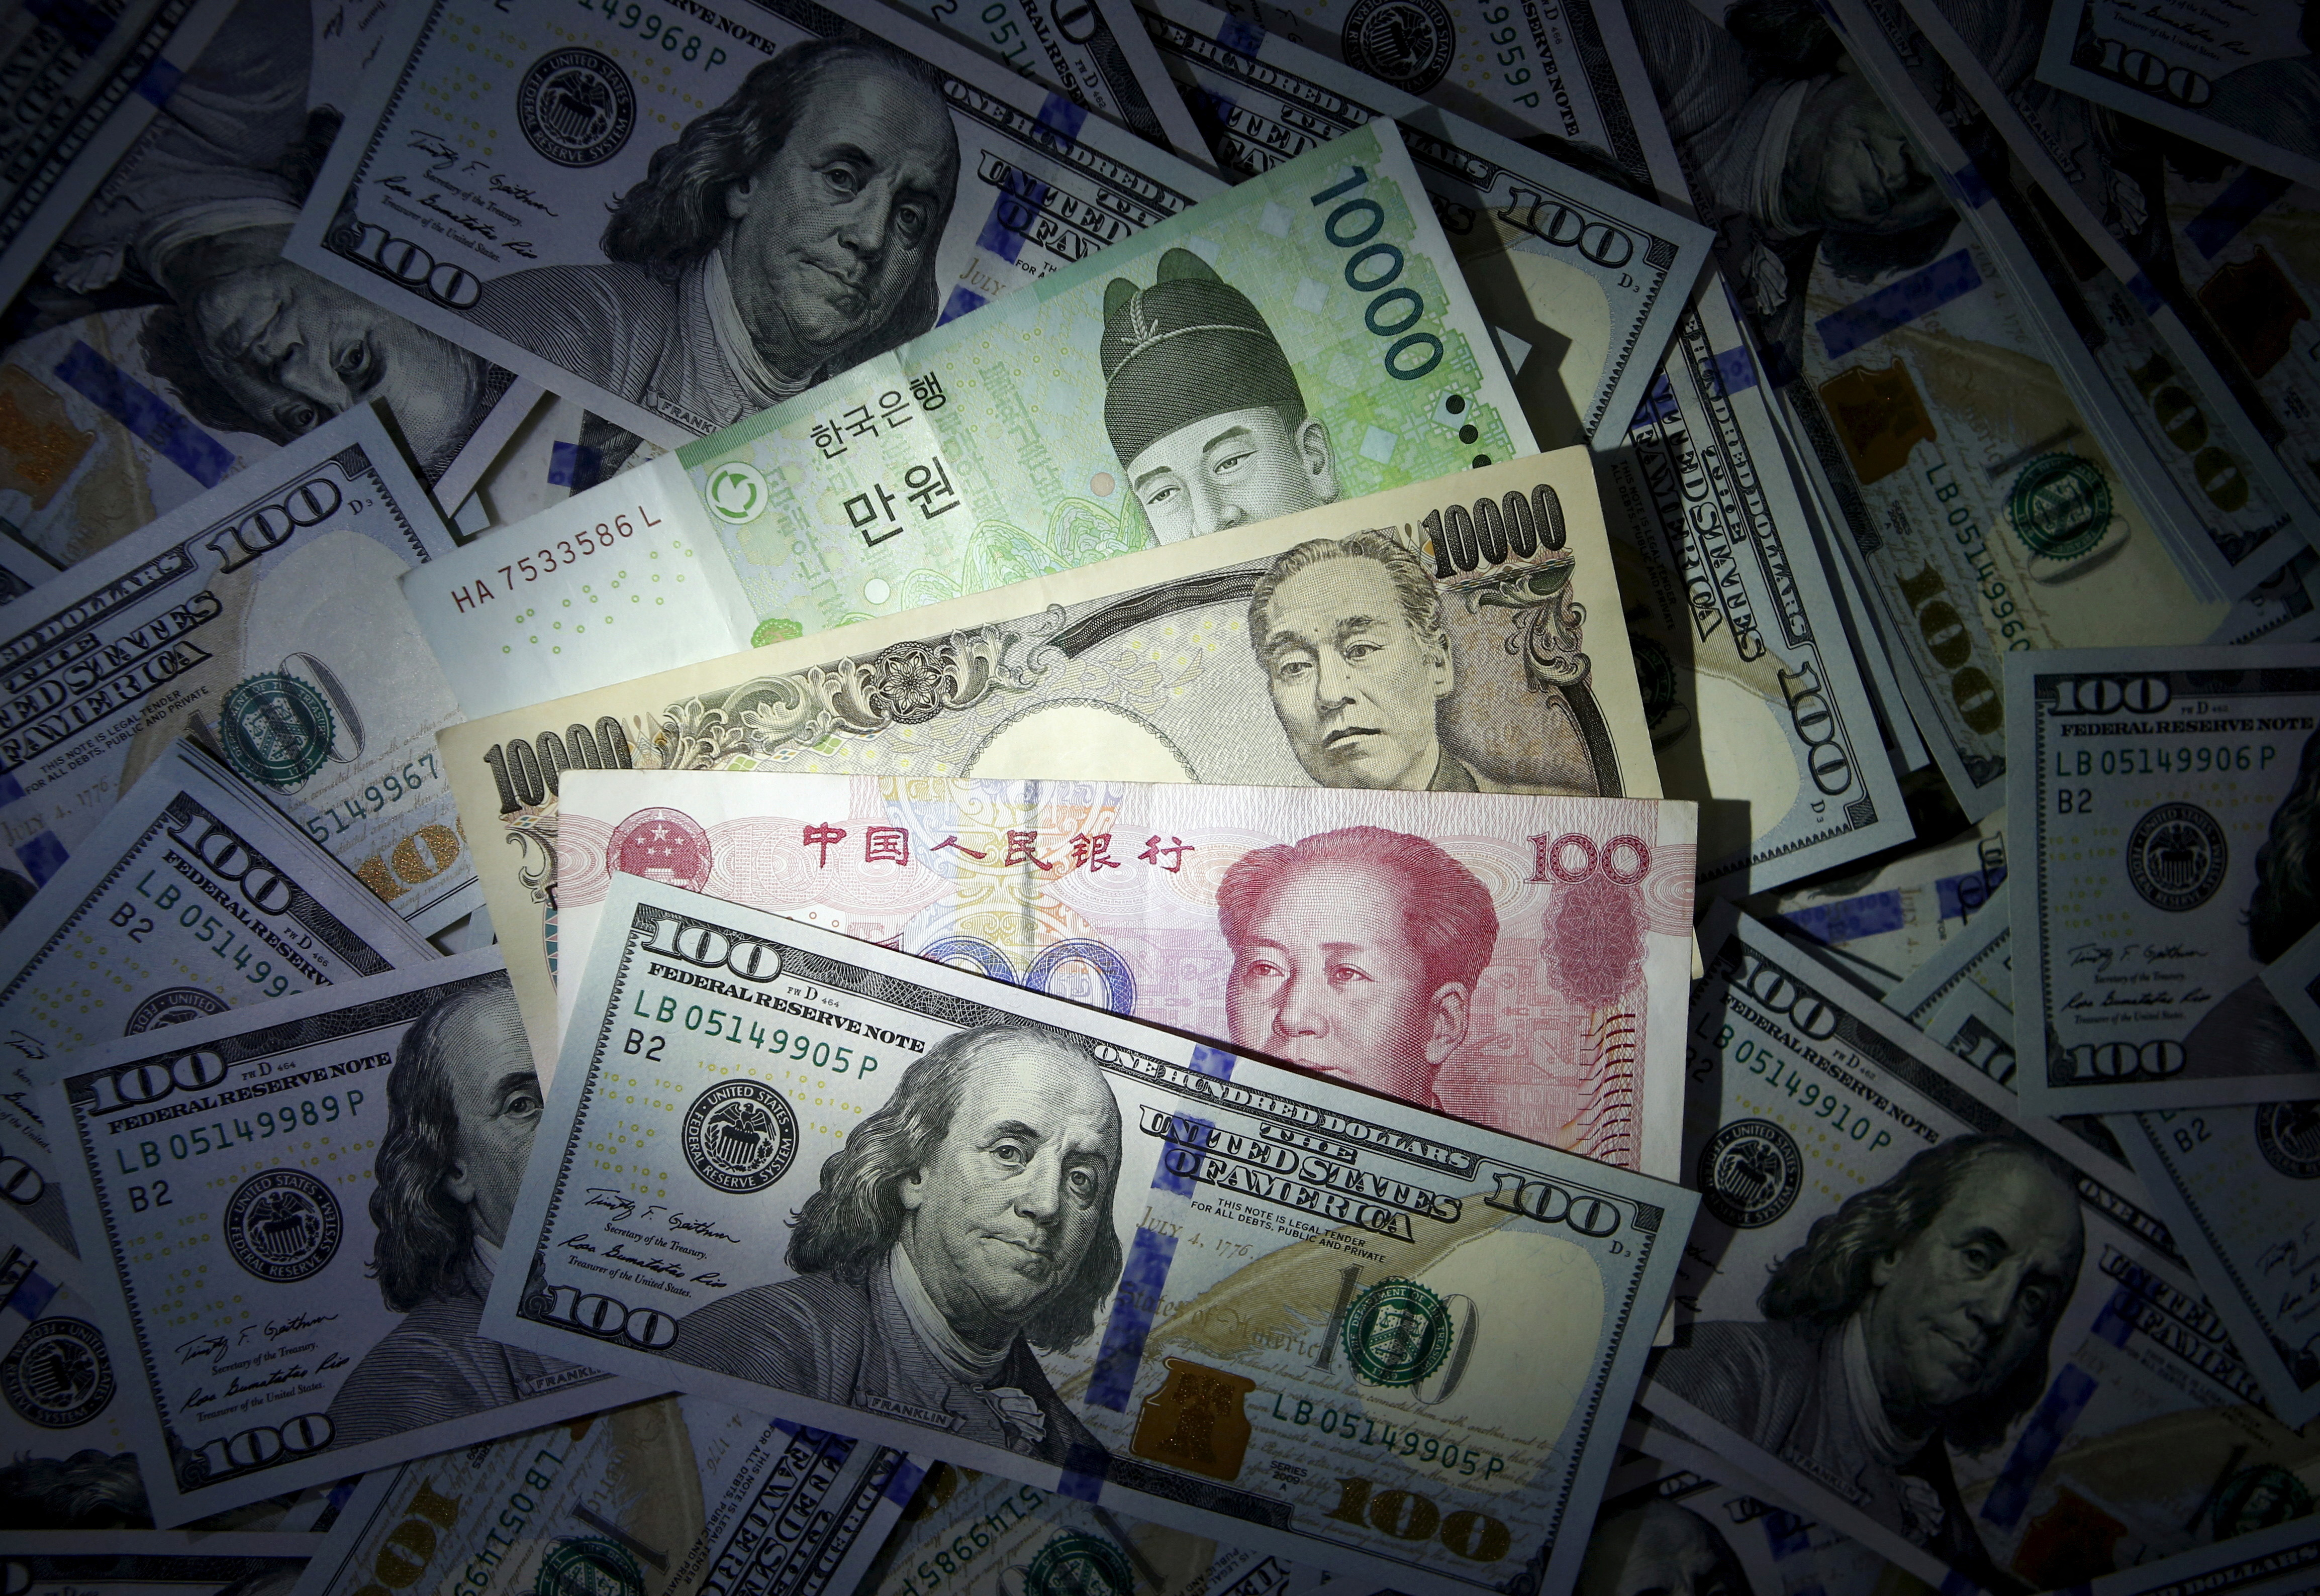 Illustration of South Korean won, Chinese yuan and Japanese yen notes seen on U.S. $100 notes